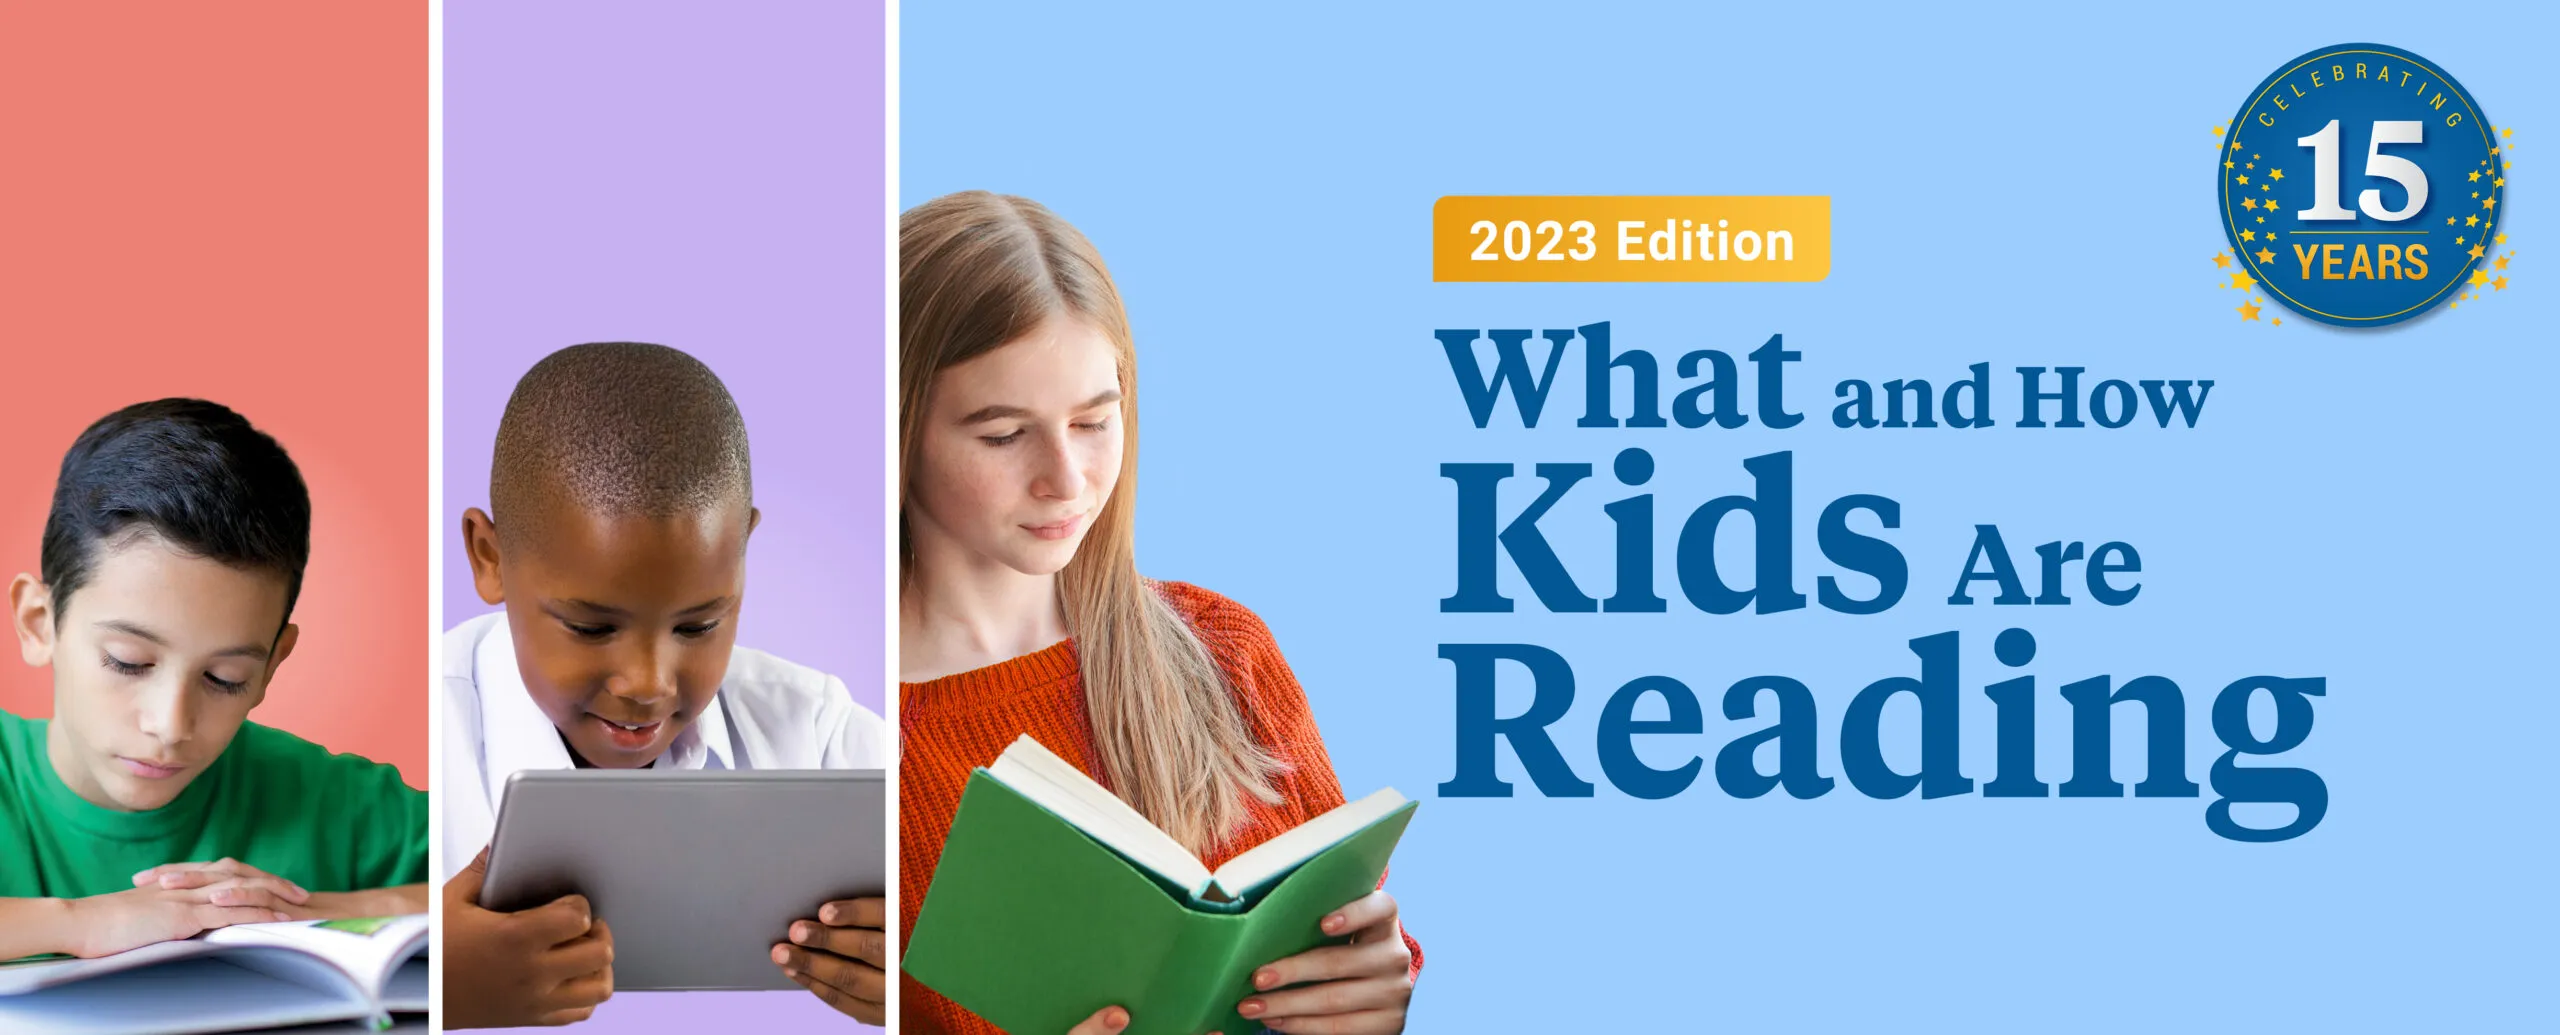 Hero image for the What Kids Are Reading Report 2023 page